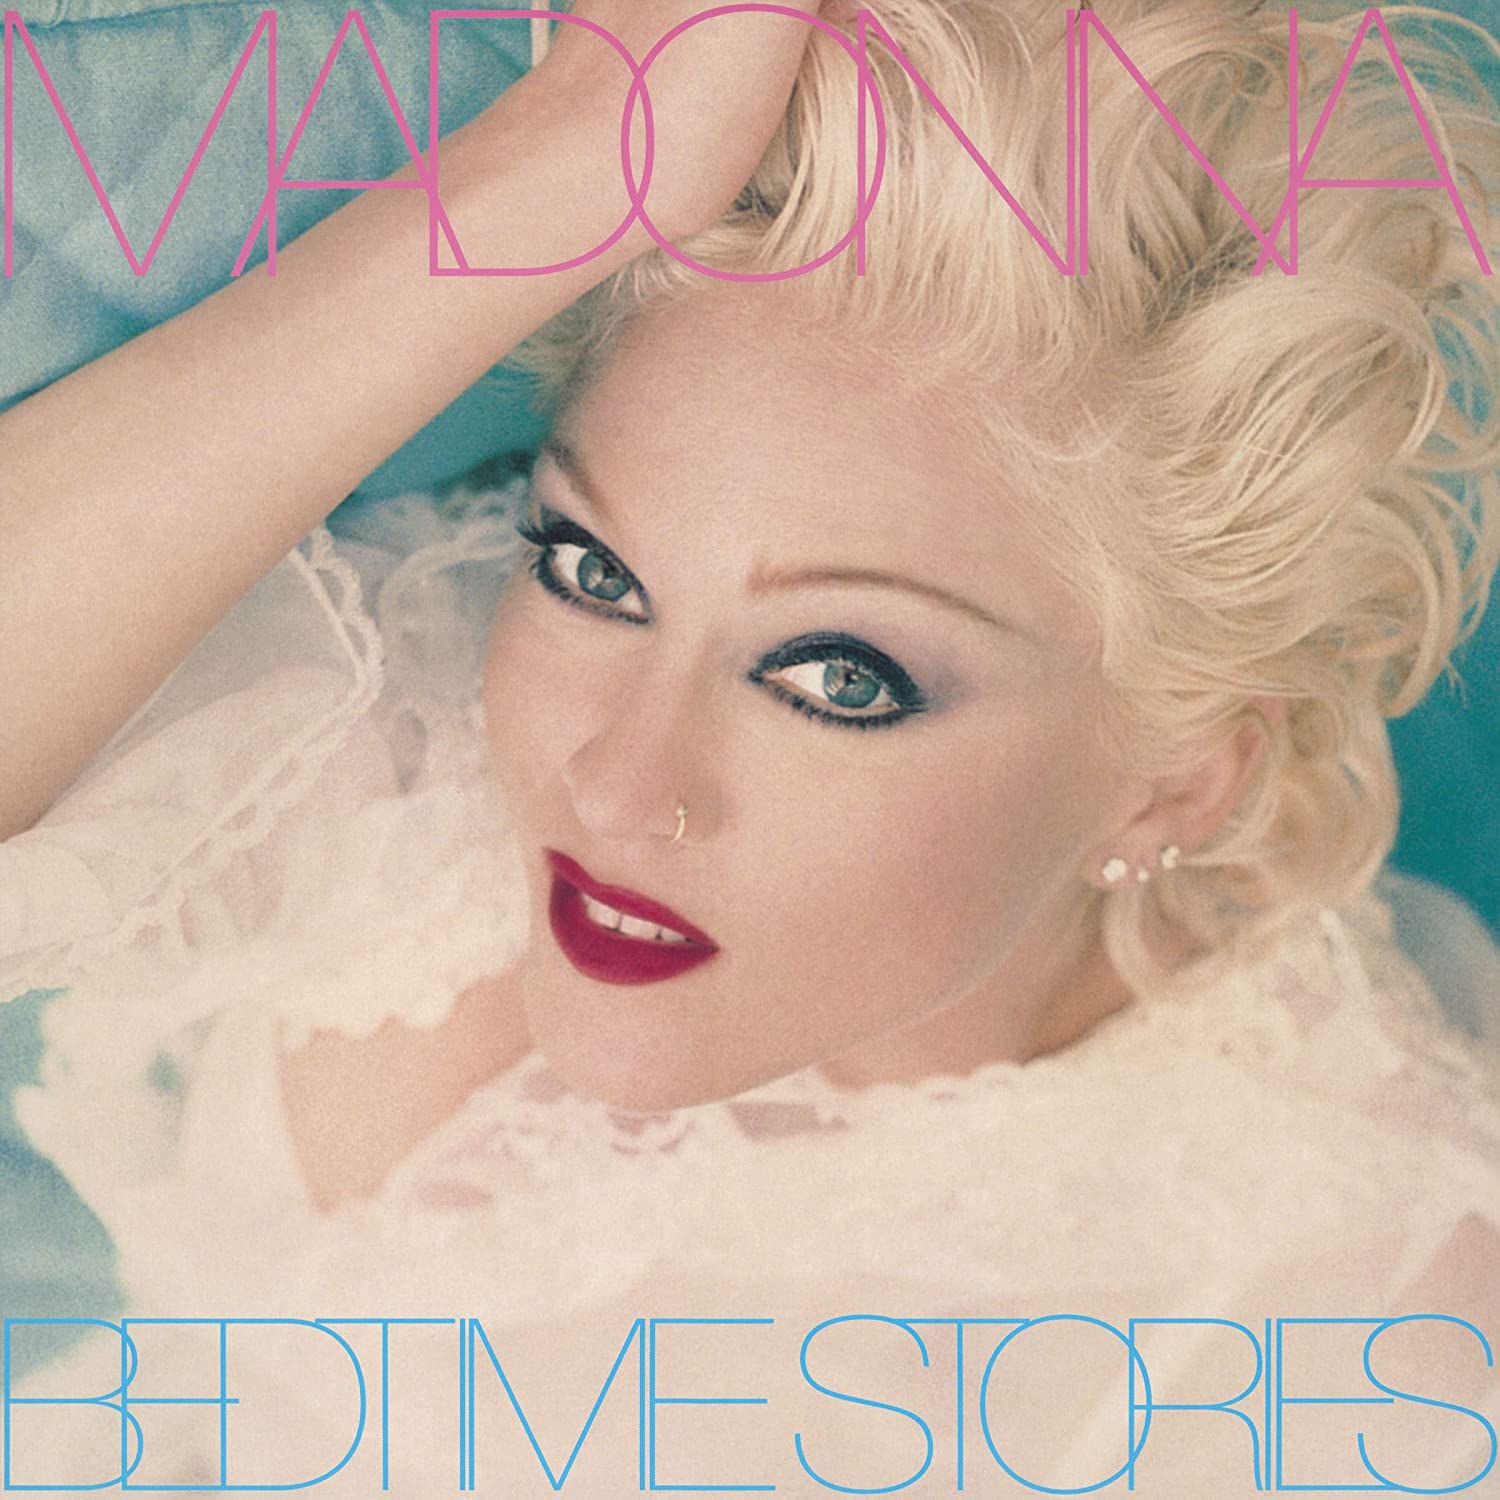 Madonna's 'Bedtime Stories' Soars To 1 on iTunes Over 25 Years After